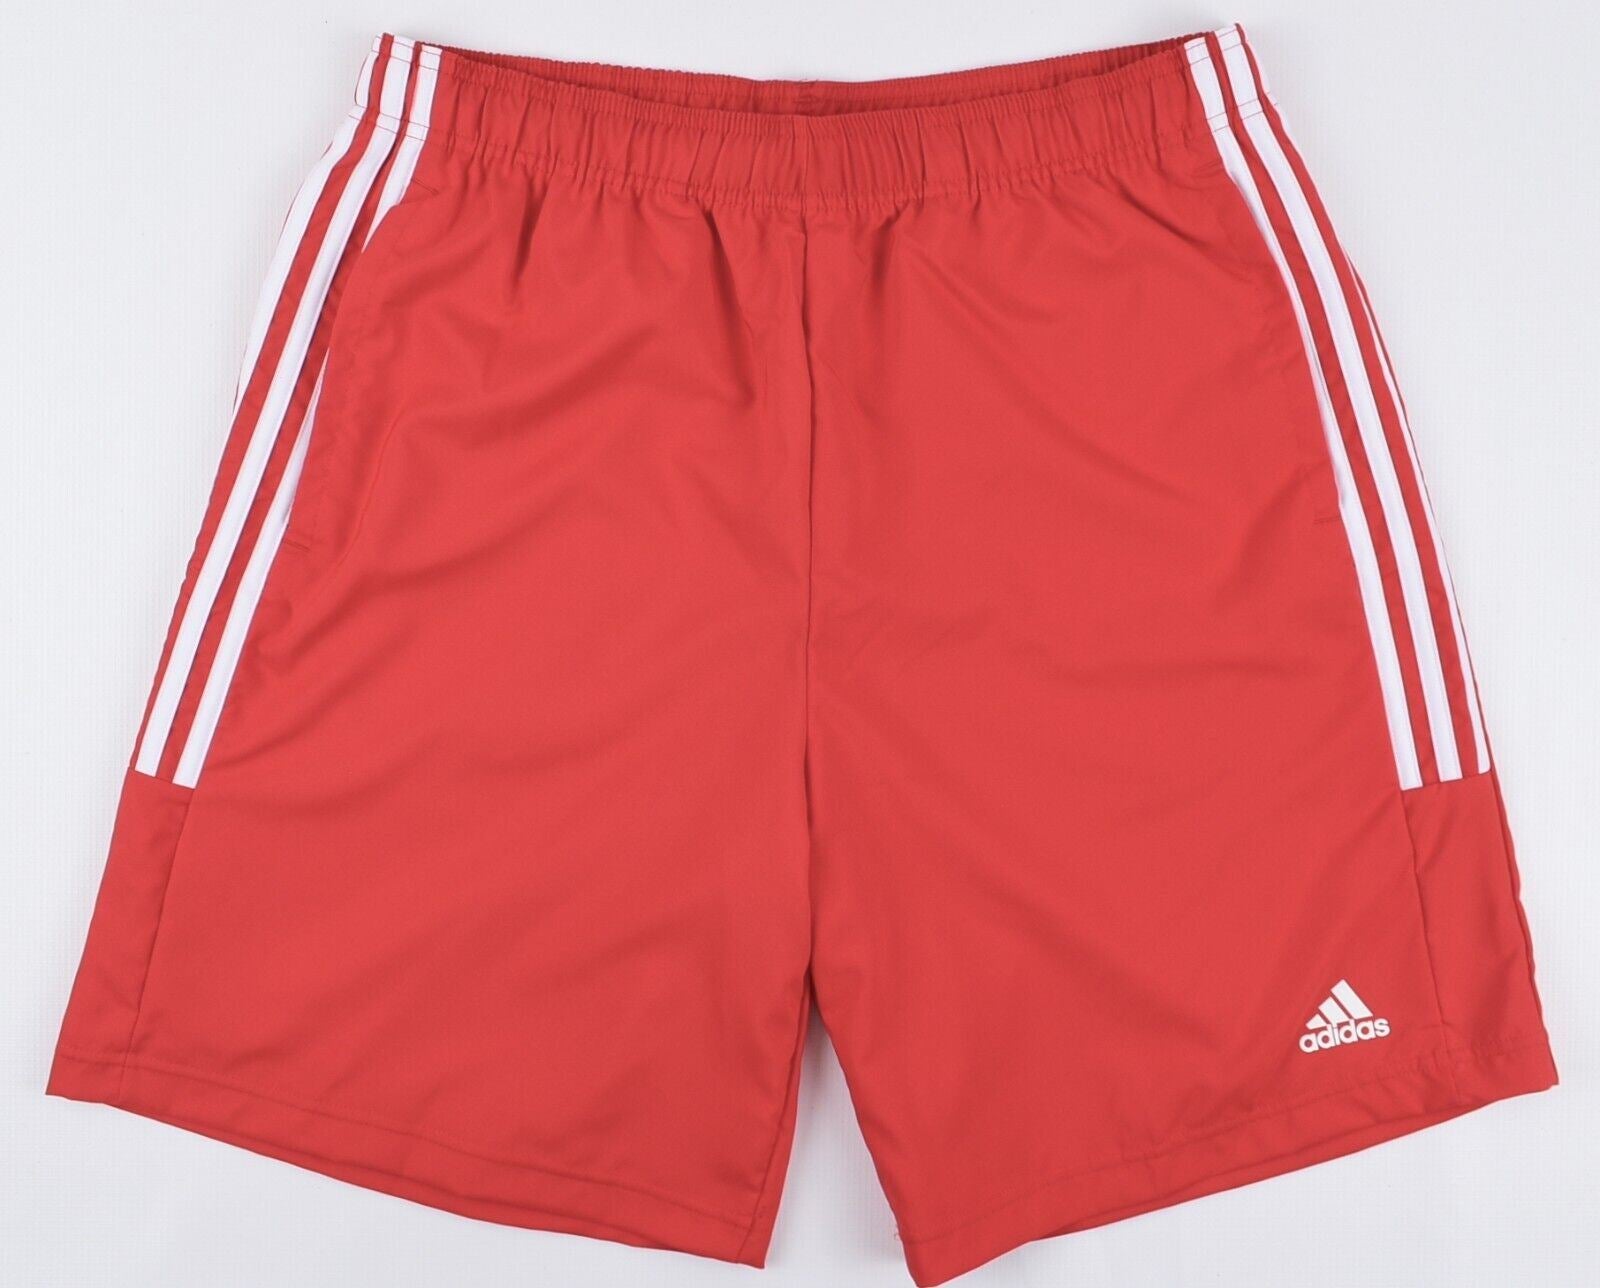 ADIDAS Men's Chelsea Relaxed Fit Sports Shorts, Red/White, size LARGE